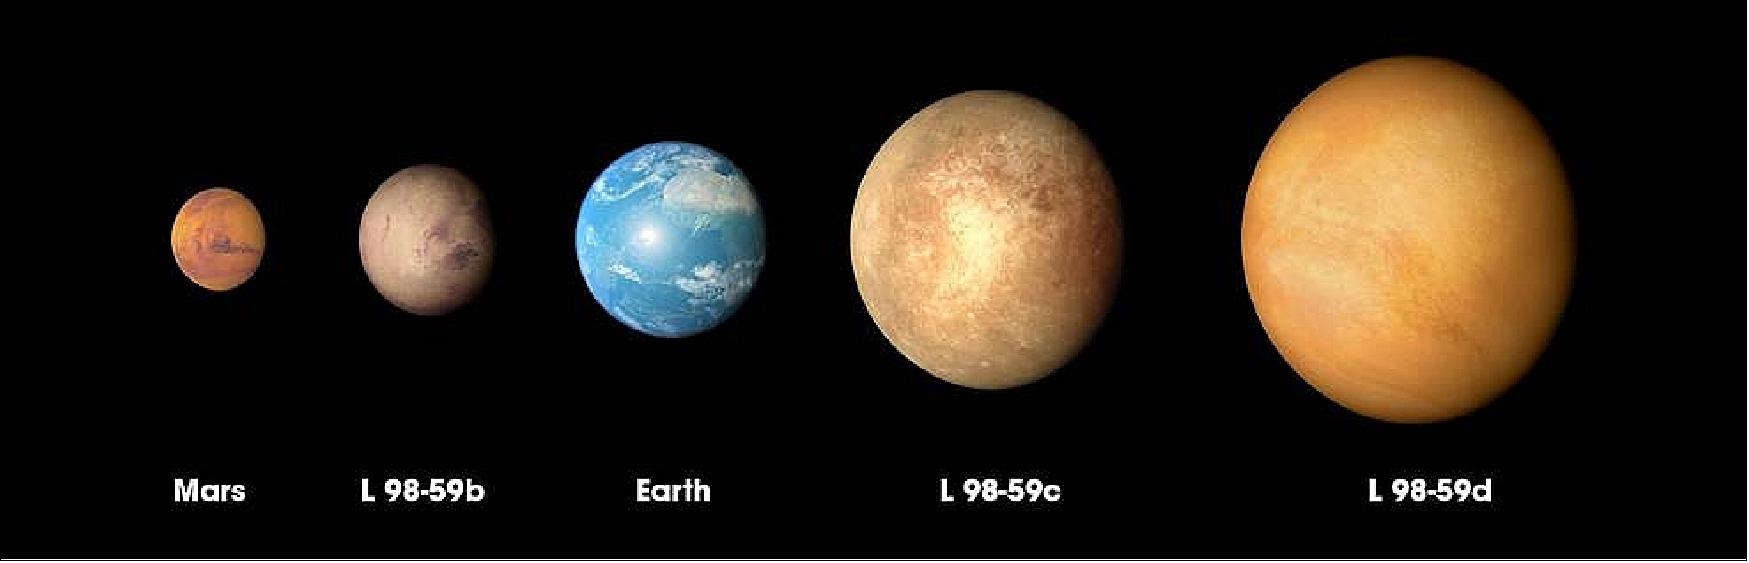 Figure 55: The three planets discovered in the L98-59 system by NASA’s TESS mission are compared to Mars and Earth in order of increasing size in this illustration (image credit: NASA/GSFC)